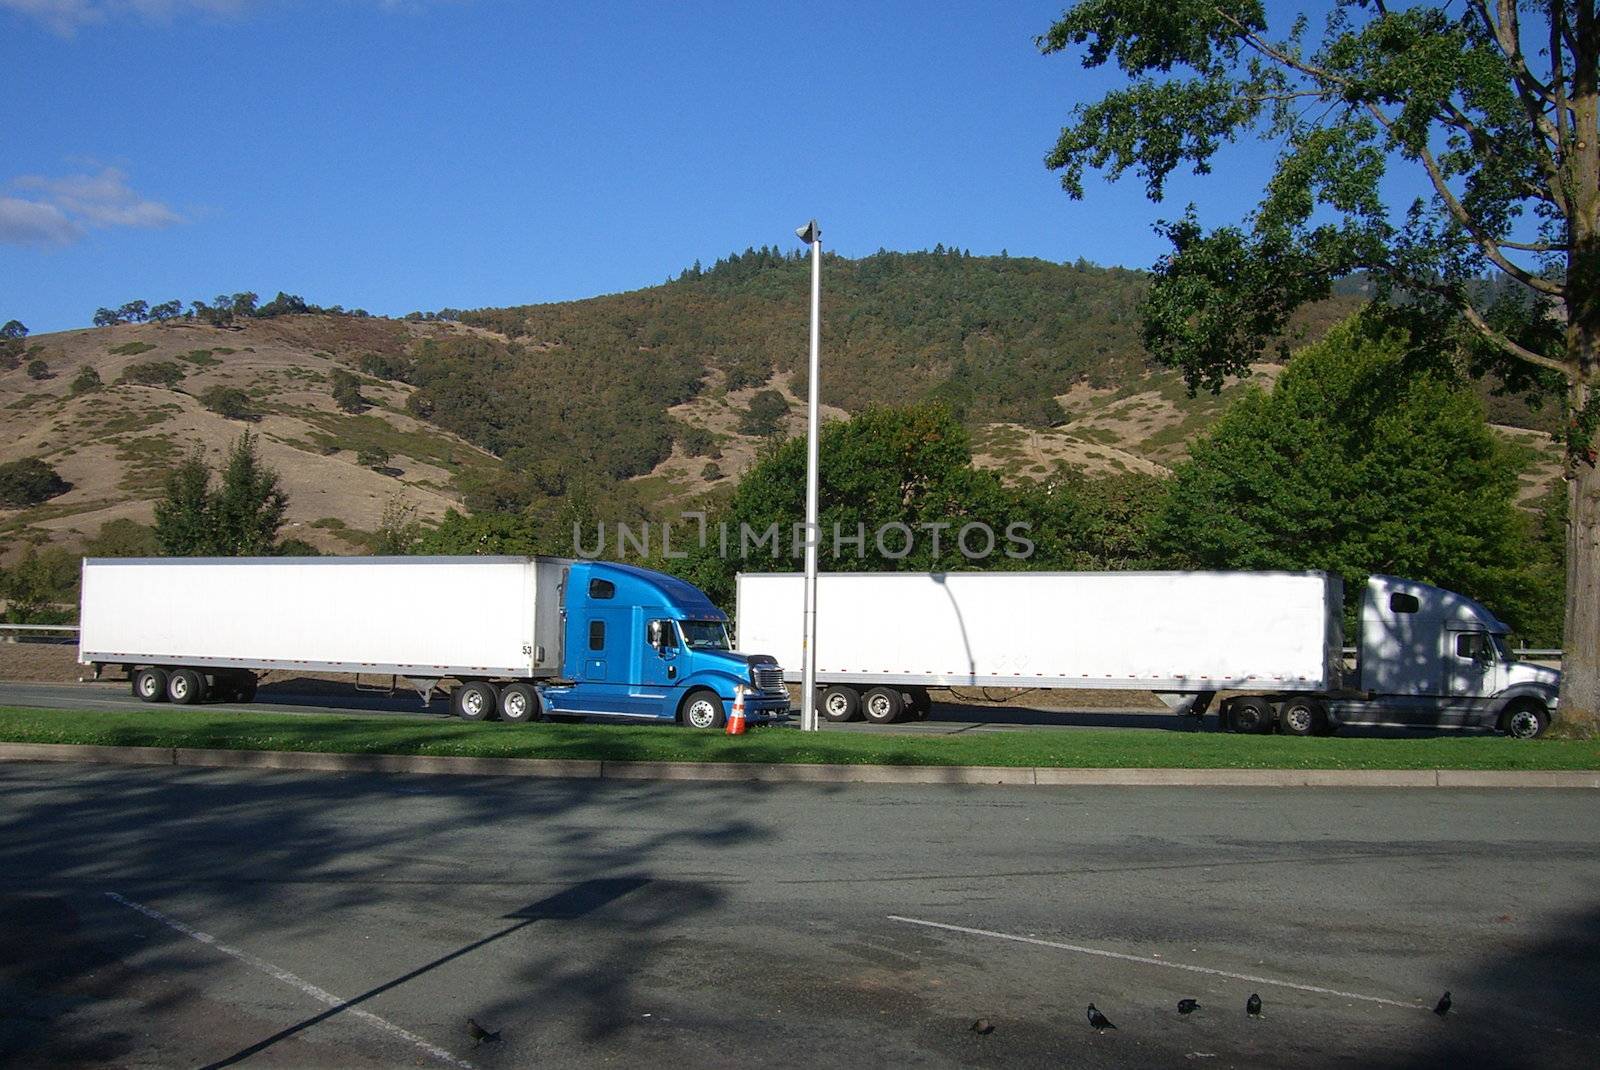 Trucks rest under a tree at an isolated truckstop.